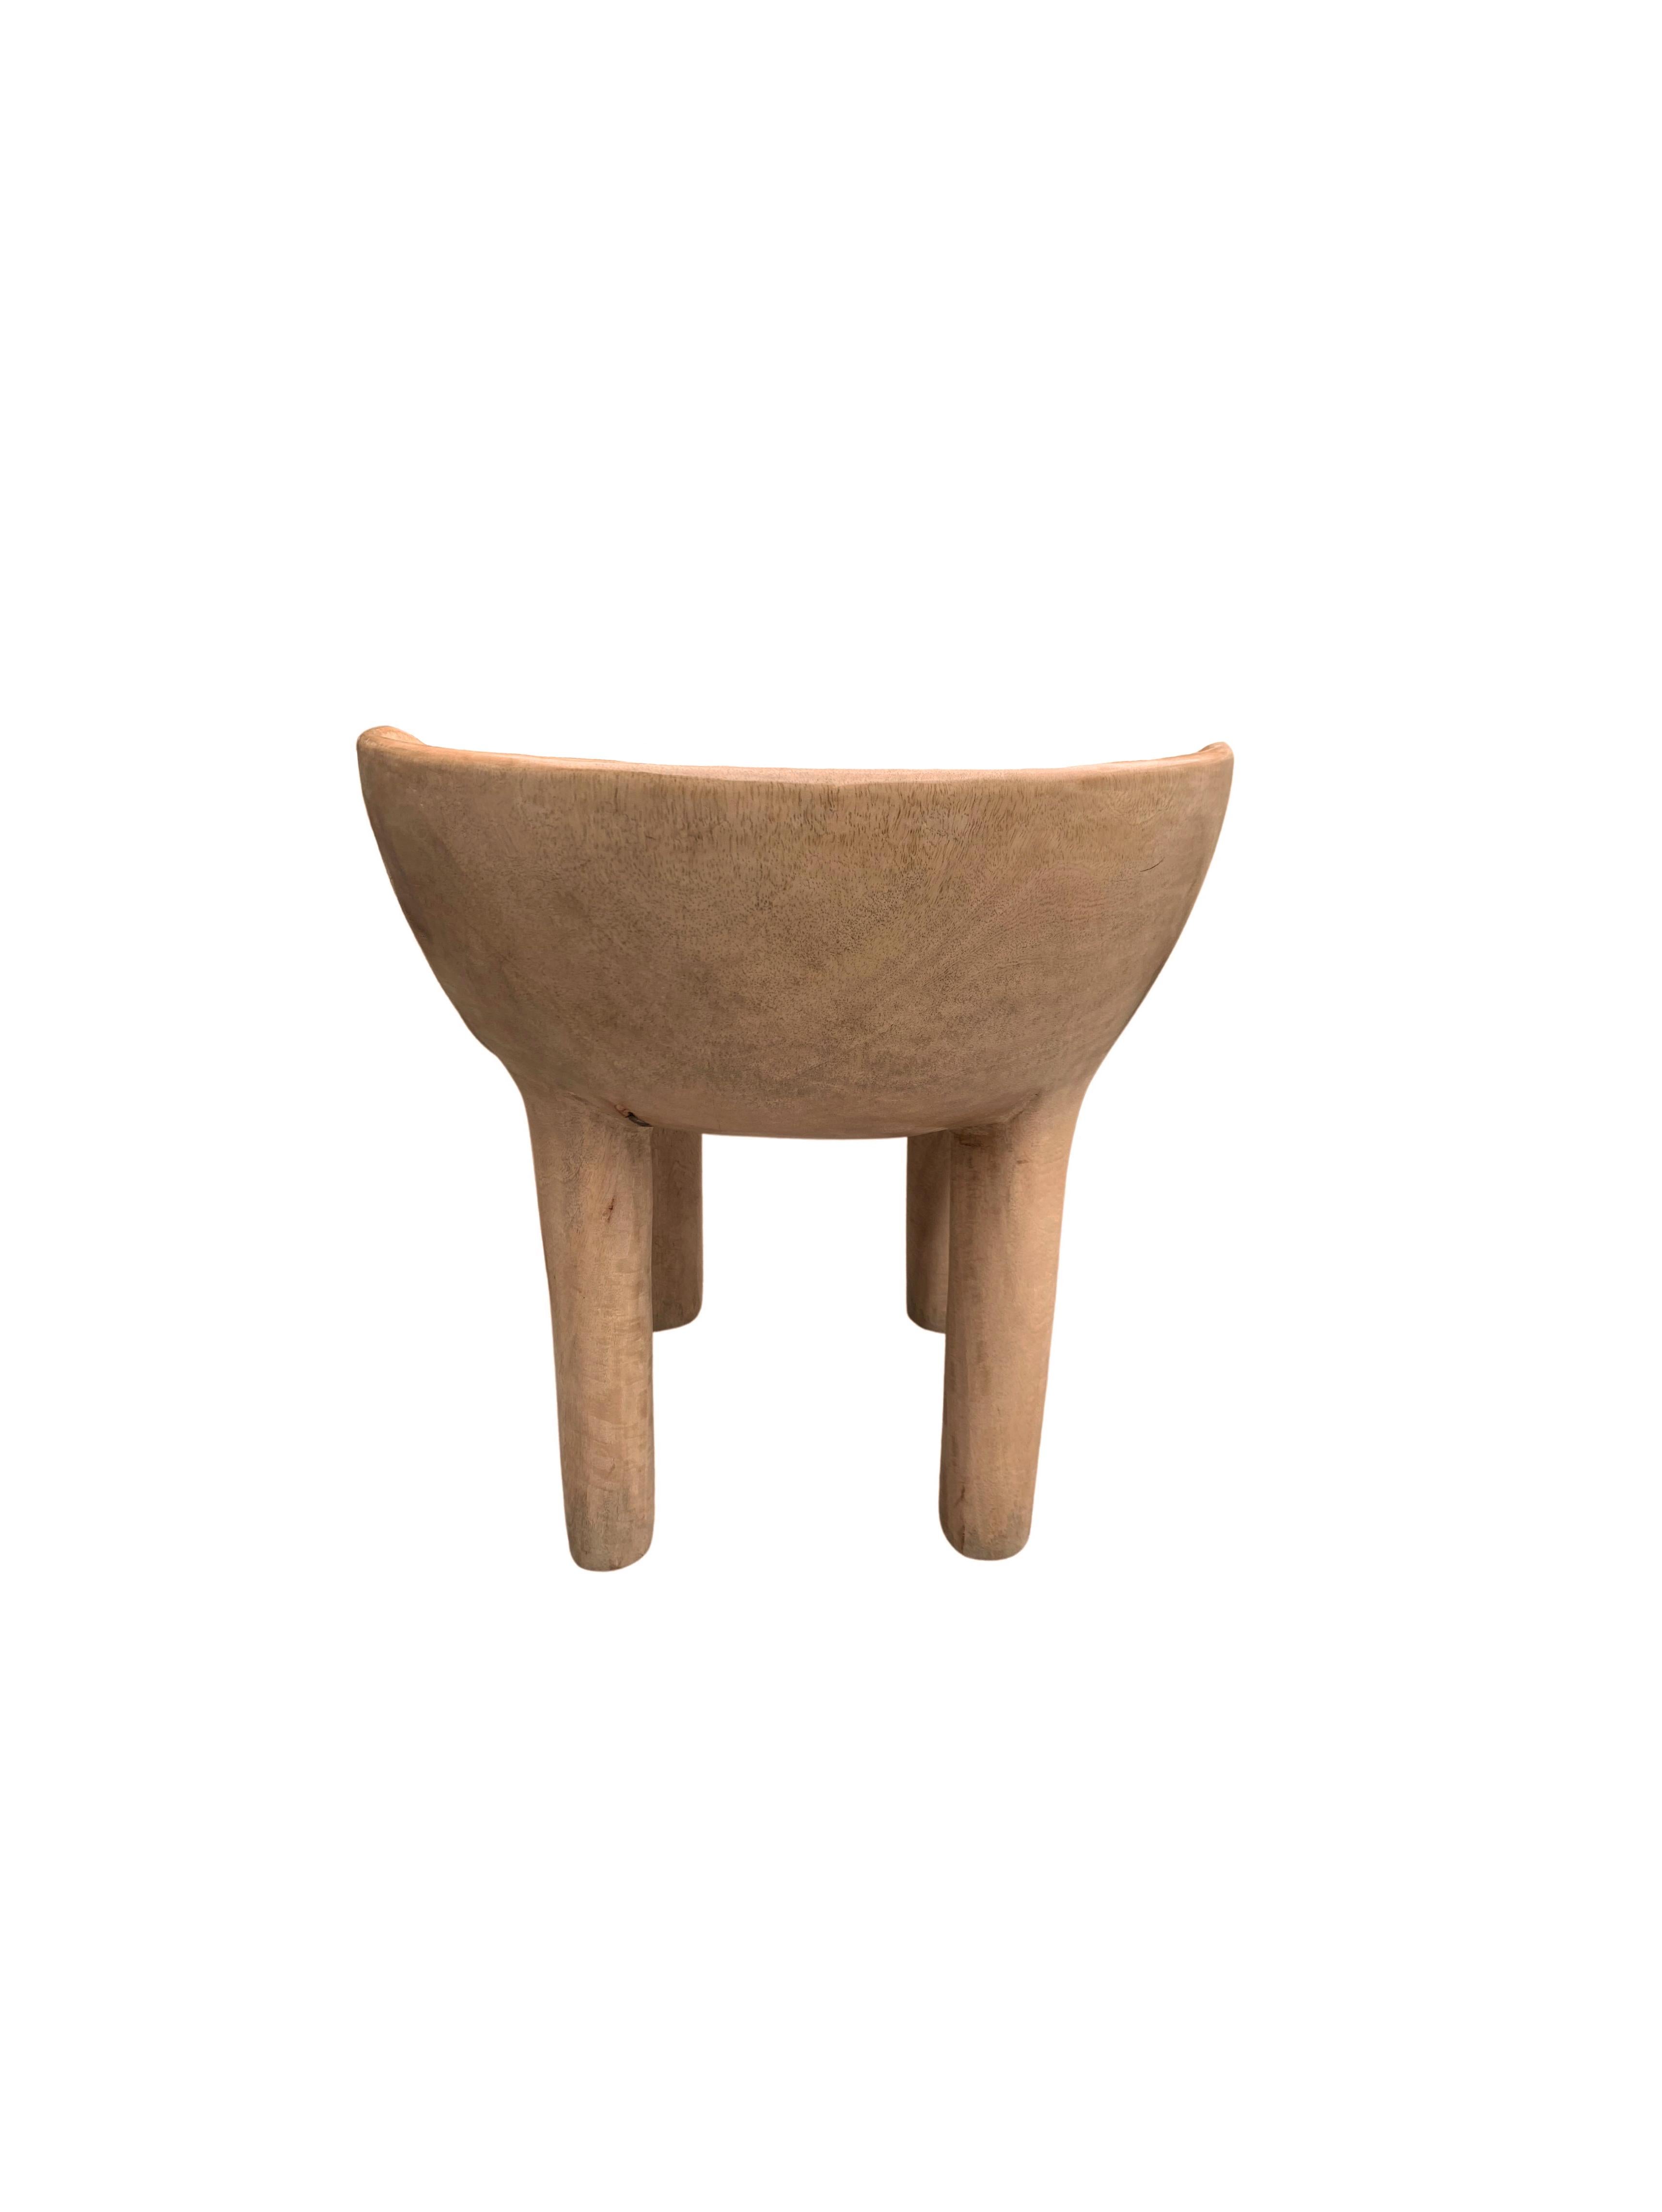 Hand-Crafted Sculptural Mango Wood Chair Modern Organic For Sale